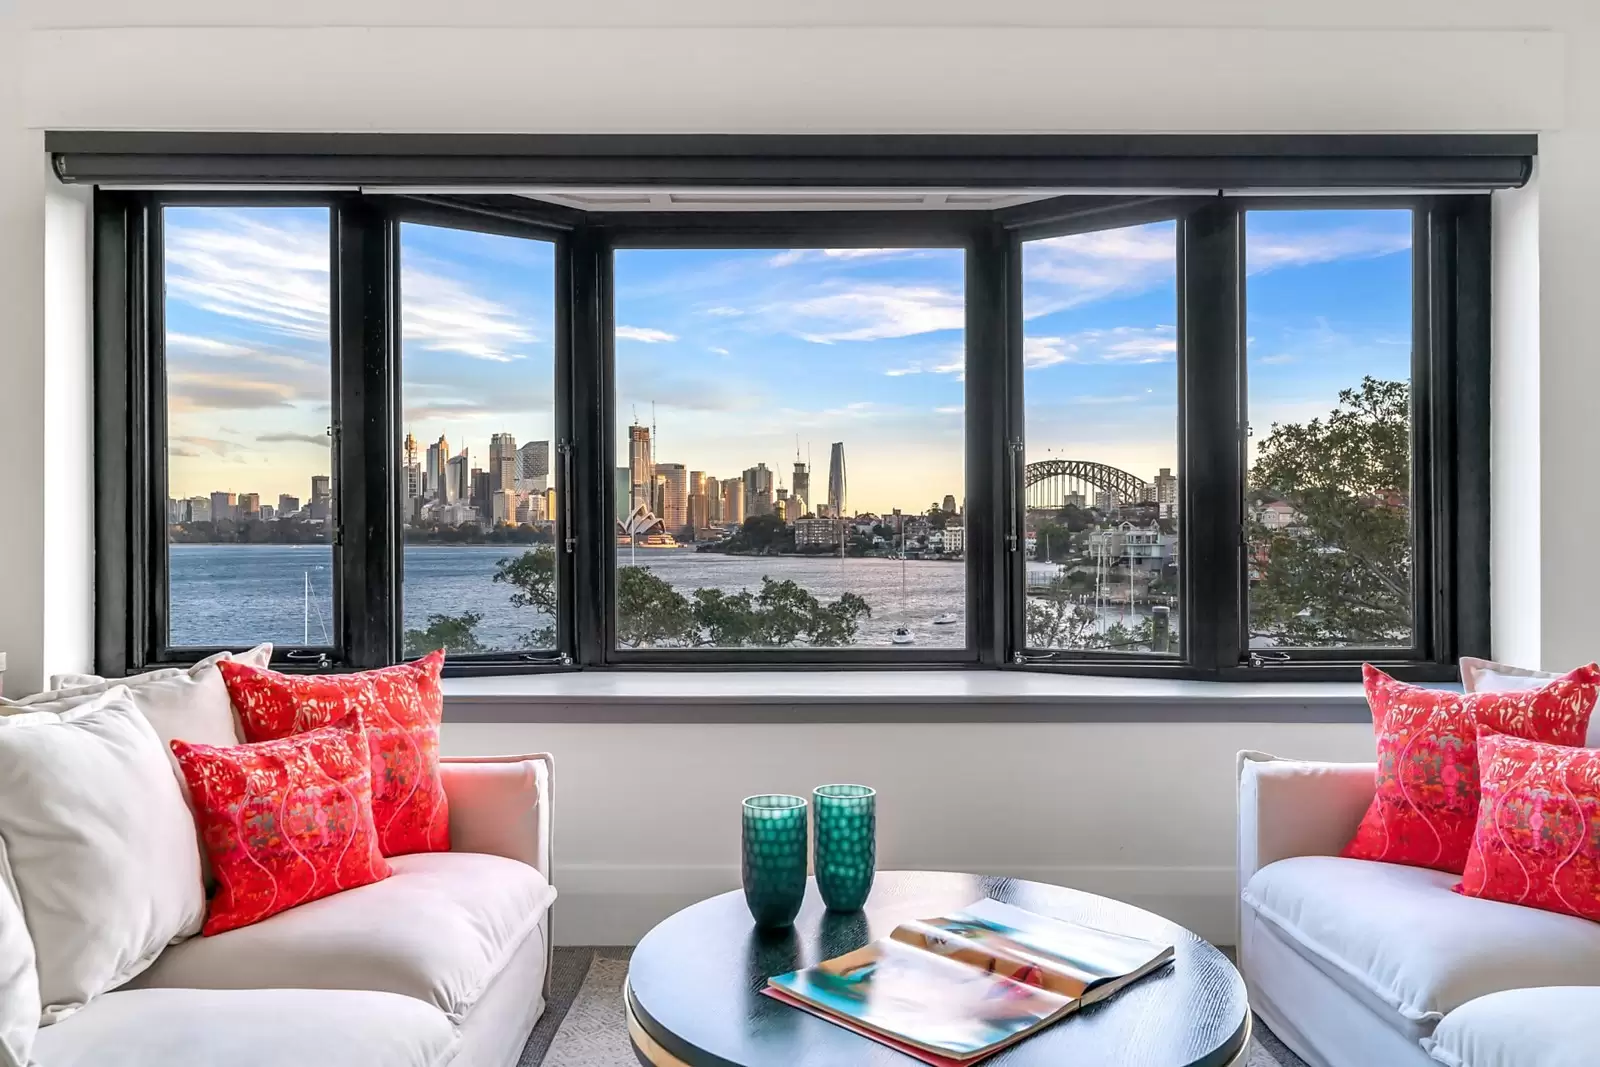 Photo #4: 2/24 Milson Road, Cremorne Point - Sold by Sydney Sotheby's International Realty